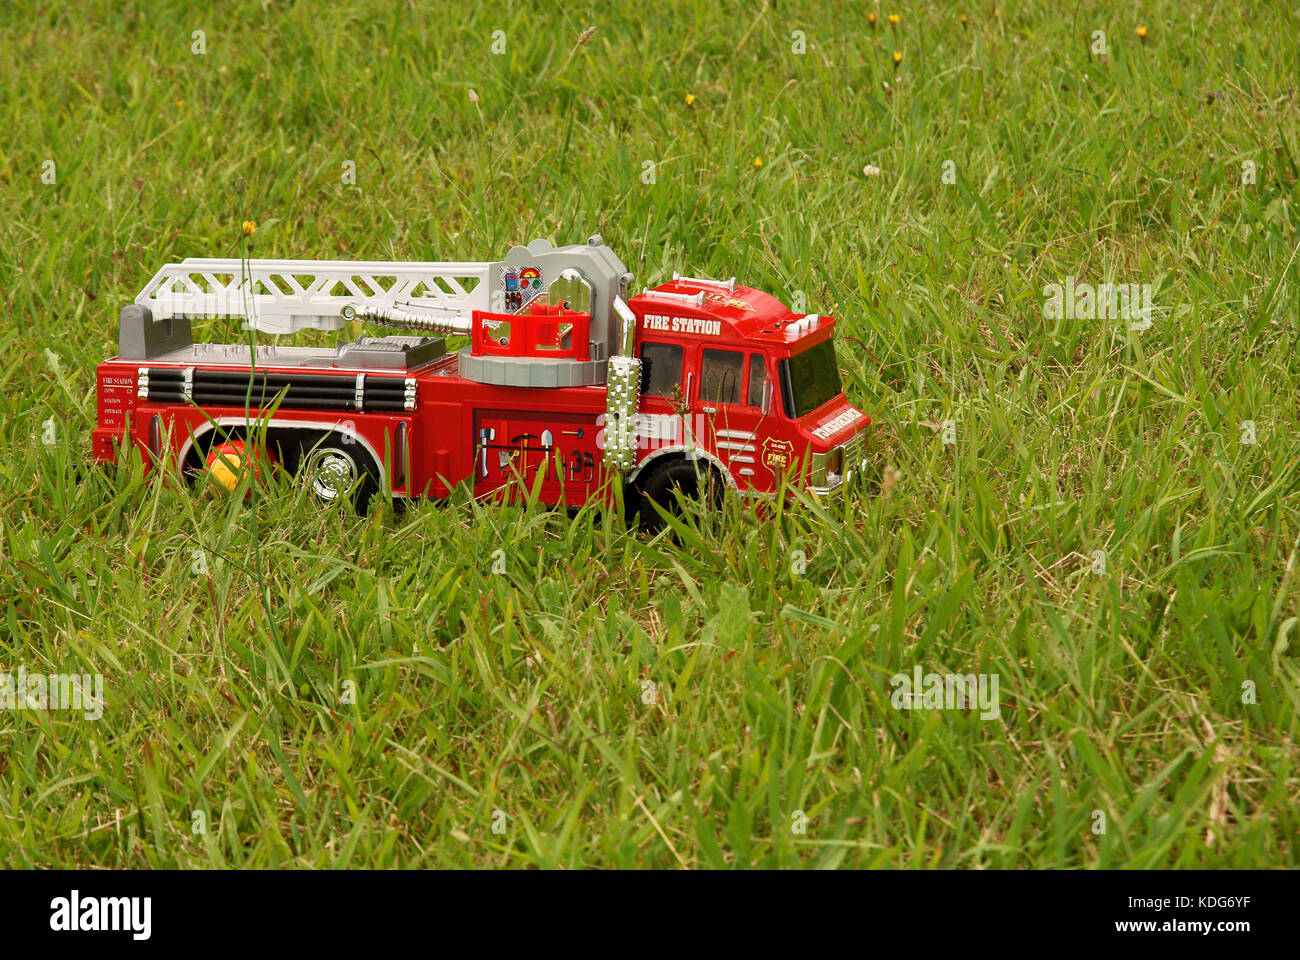 A childs abandoned toy fire engine left outside on a grassy lawn Stock Photo